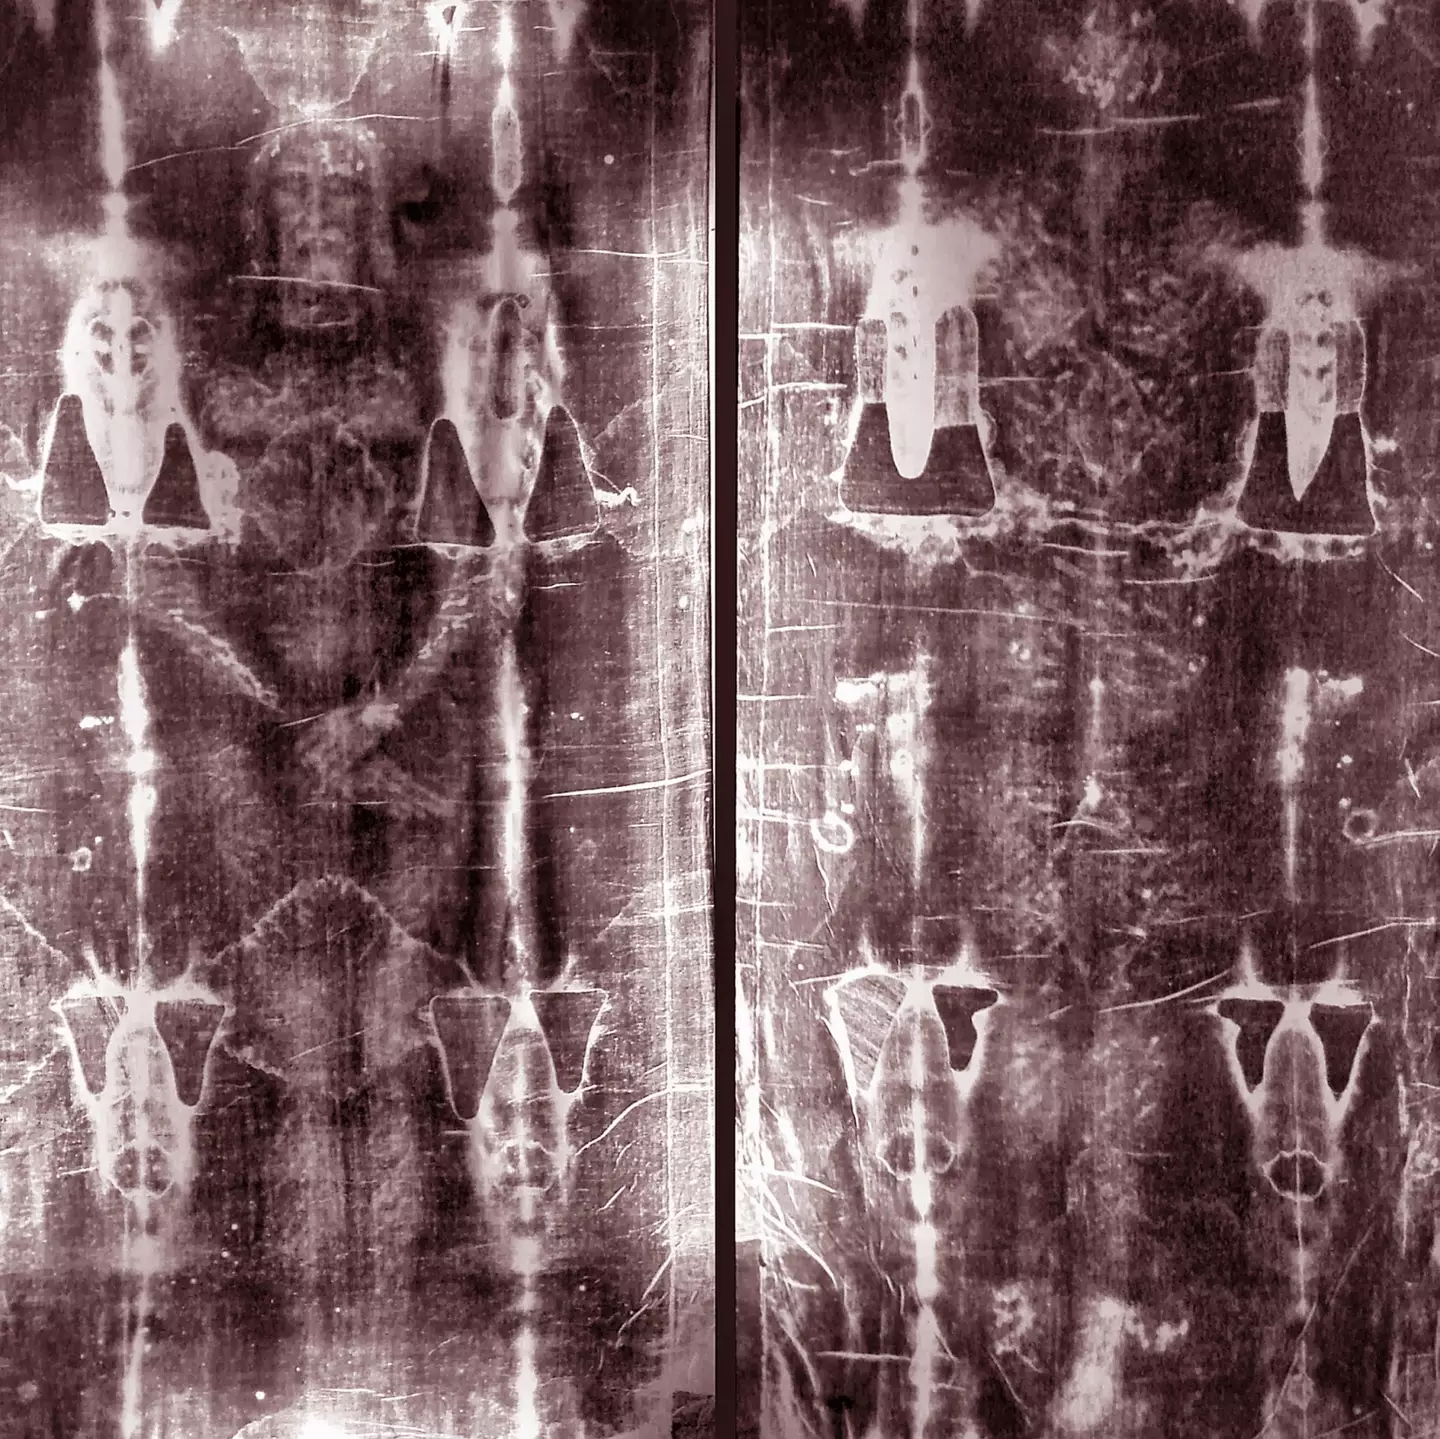 The sculpture is based on information from the Shroud of Turin.